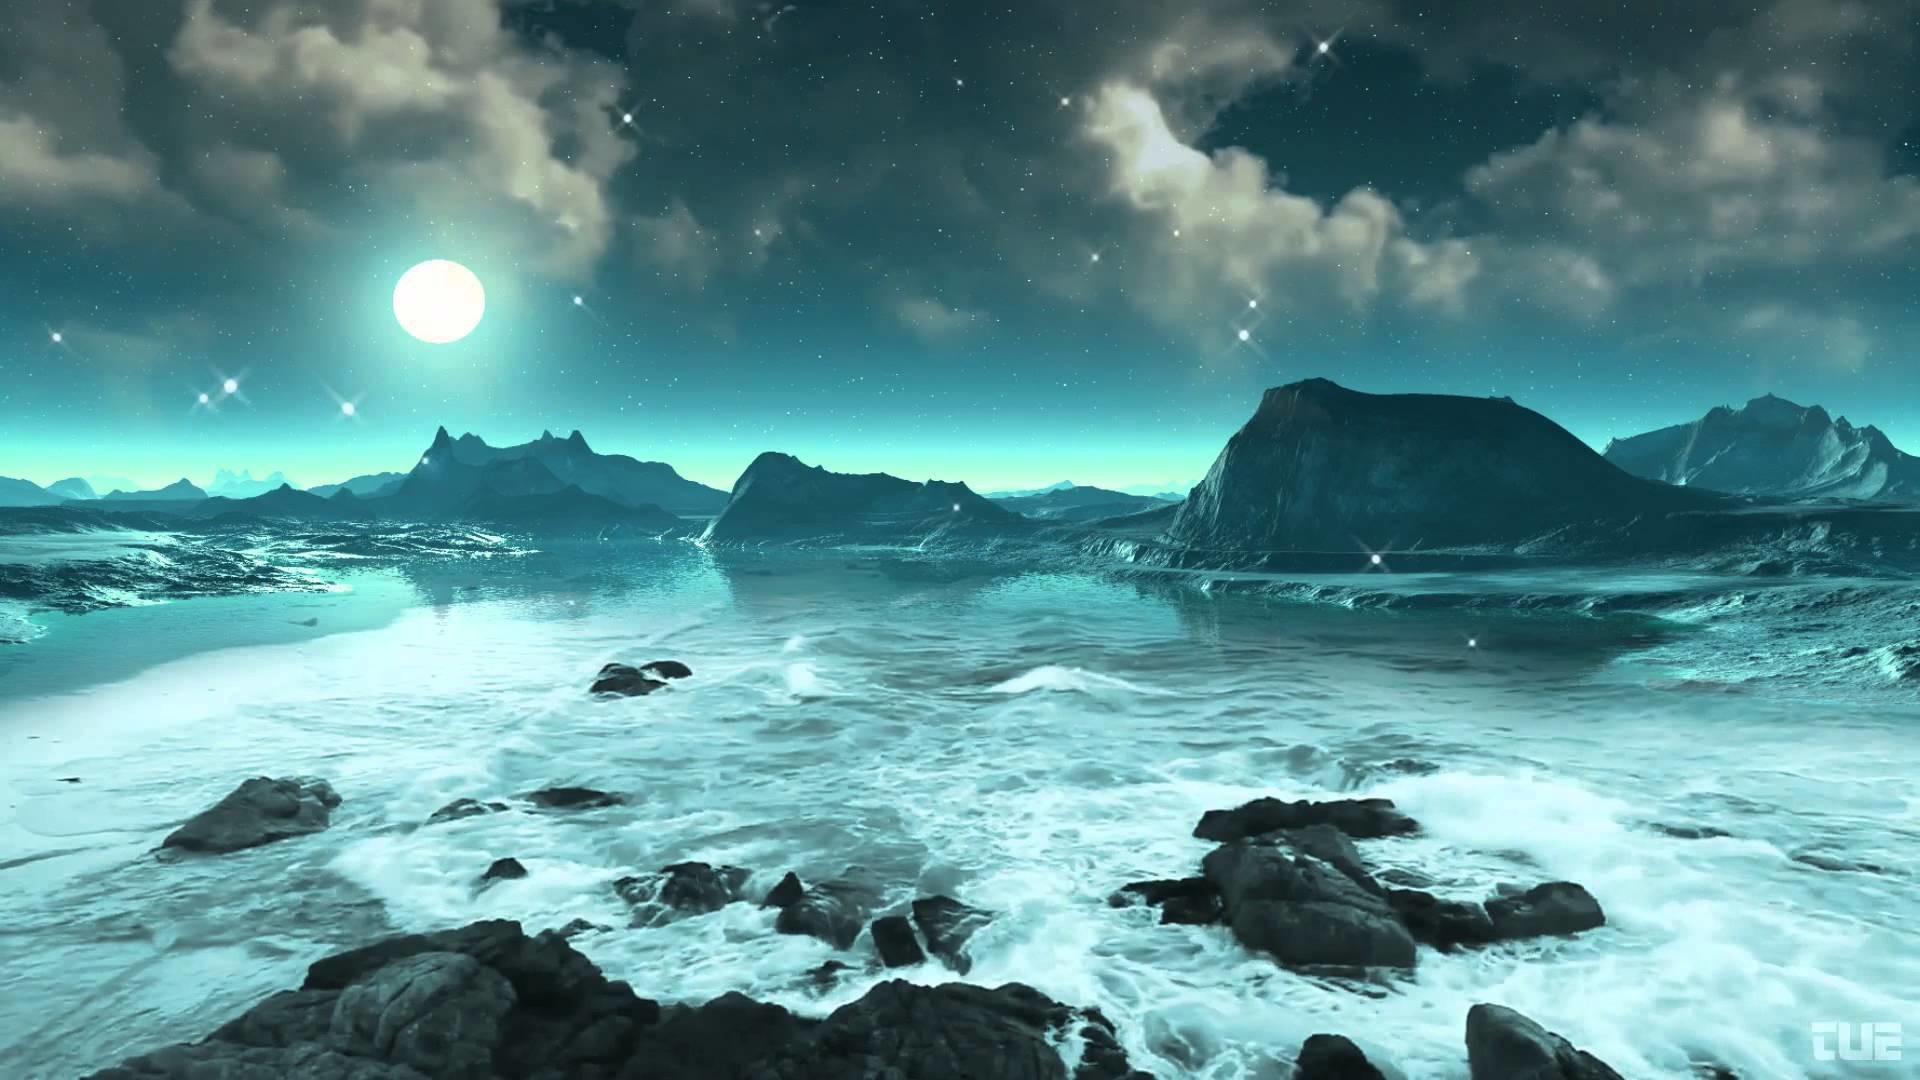 1920x1080 Moonlight, Stars And Ocean Waves 2 - Video Background HD 1080p - YouTube